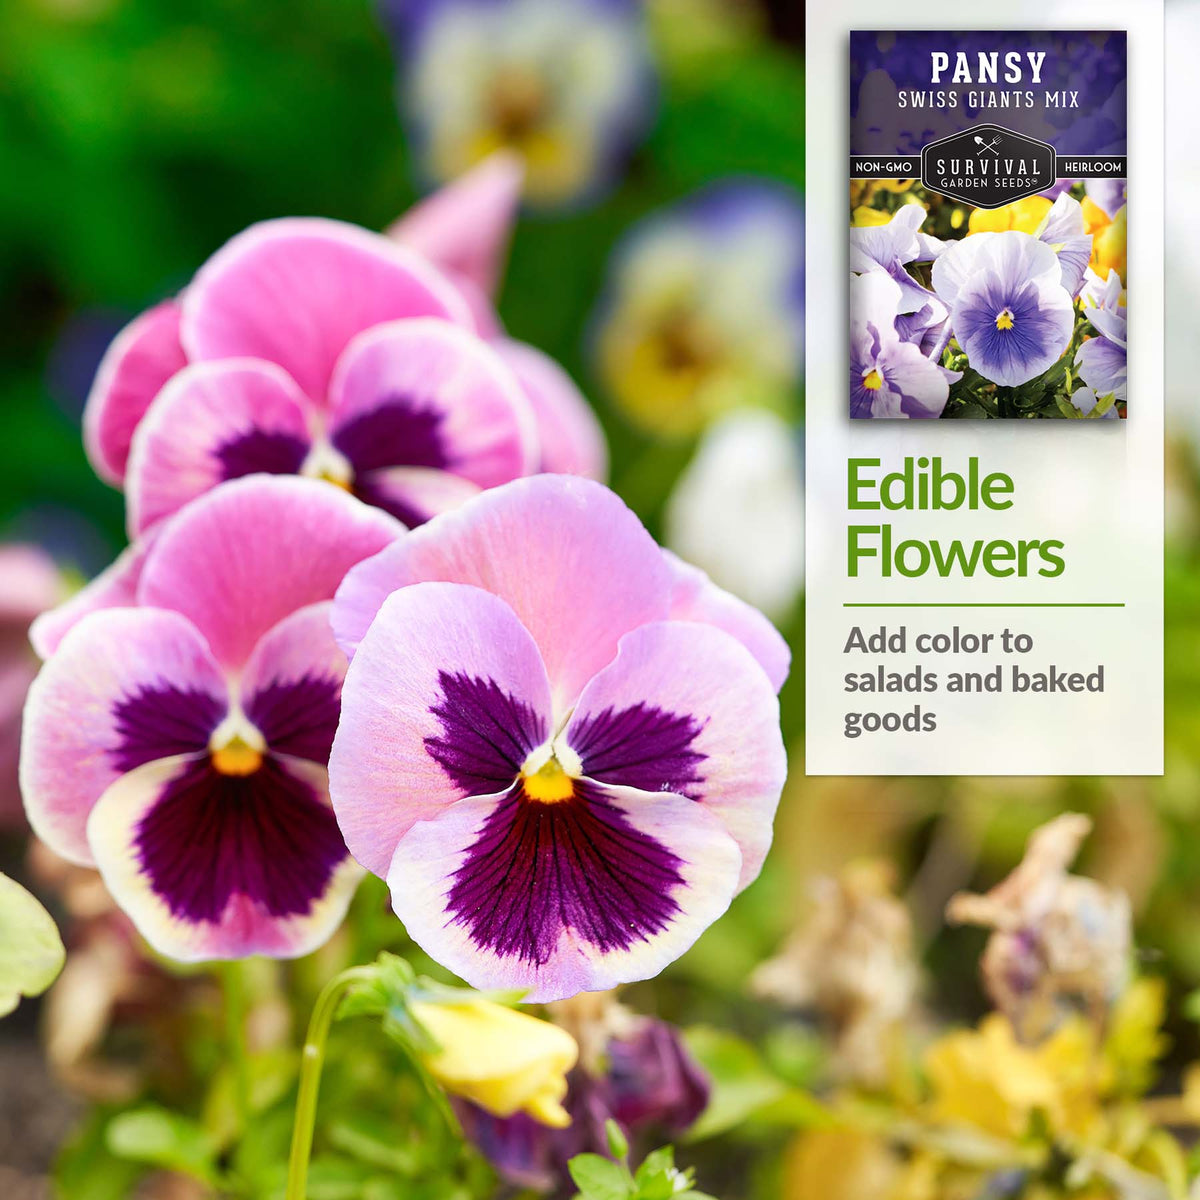 Pansy is an edible flower